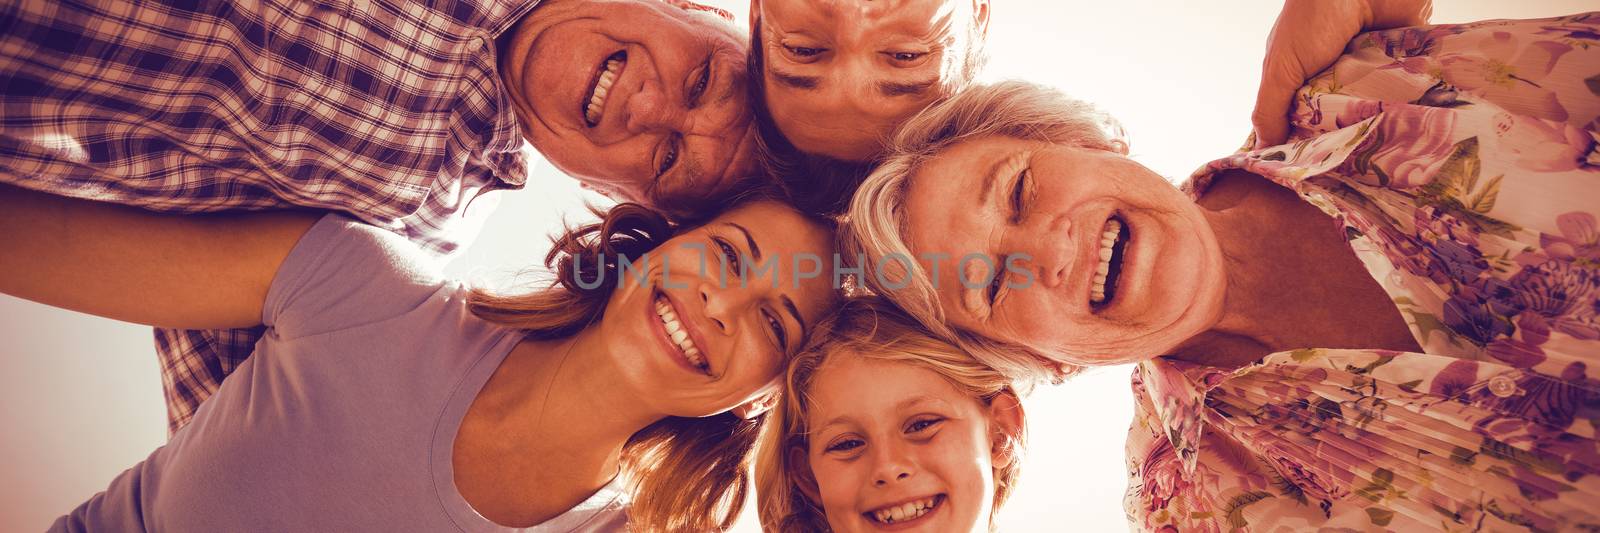 Cheerful family forming huddle by Wavebreakmedia